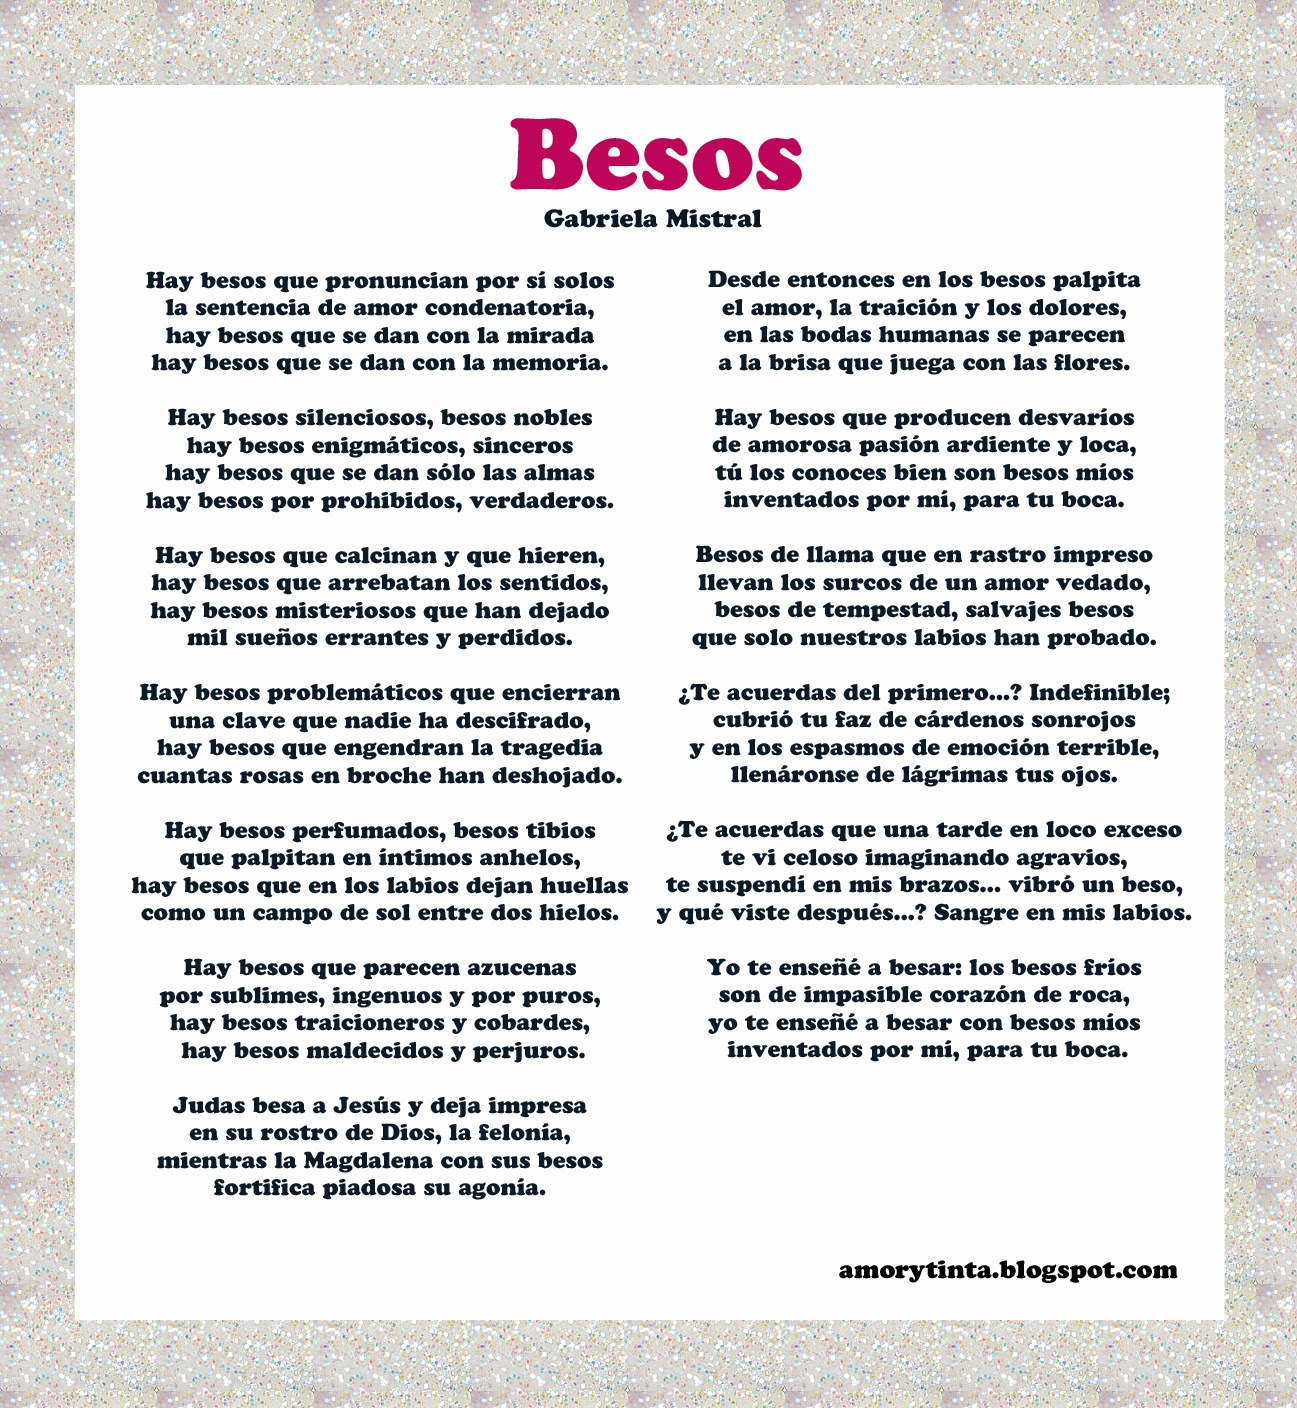 What is besitos in english